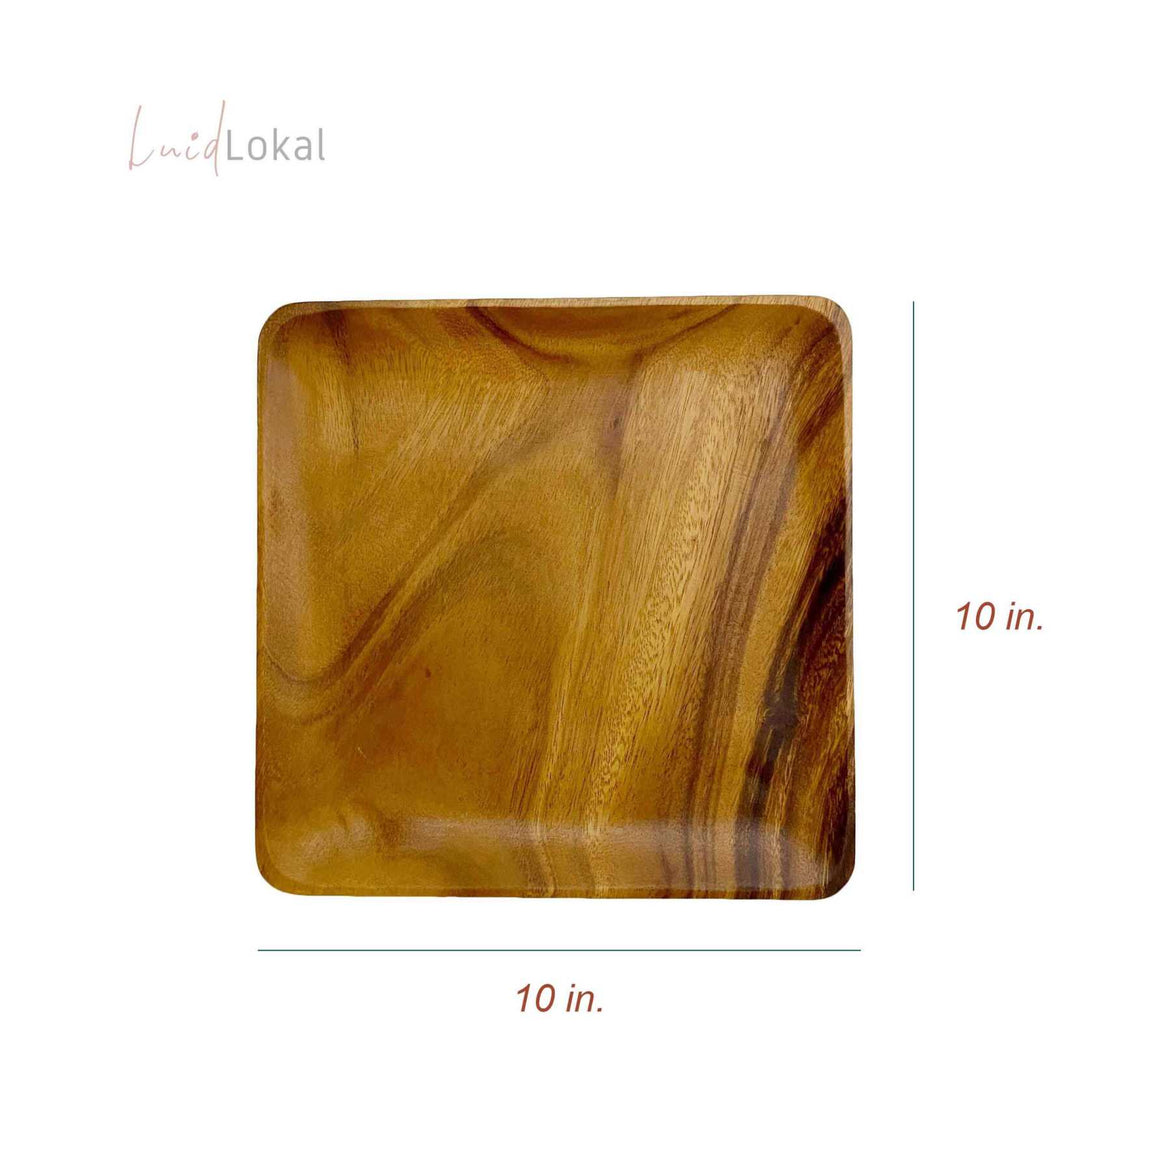 Luid Lokal Square Plate Meal Dessert Charger Plate Serving Tray Acacia Wood